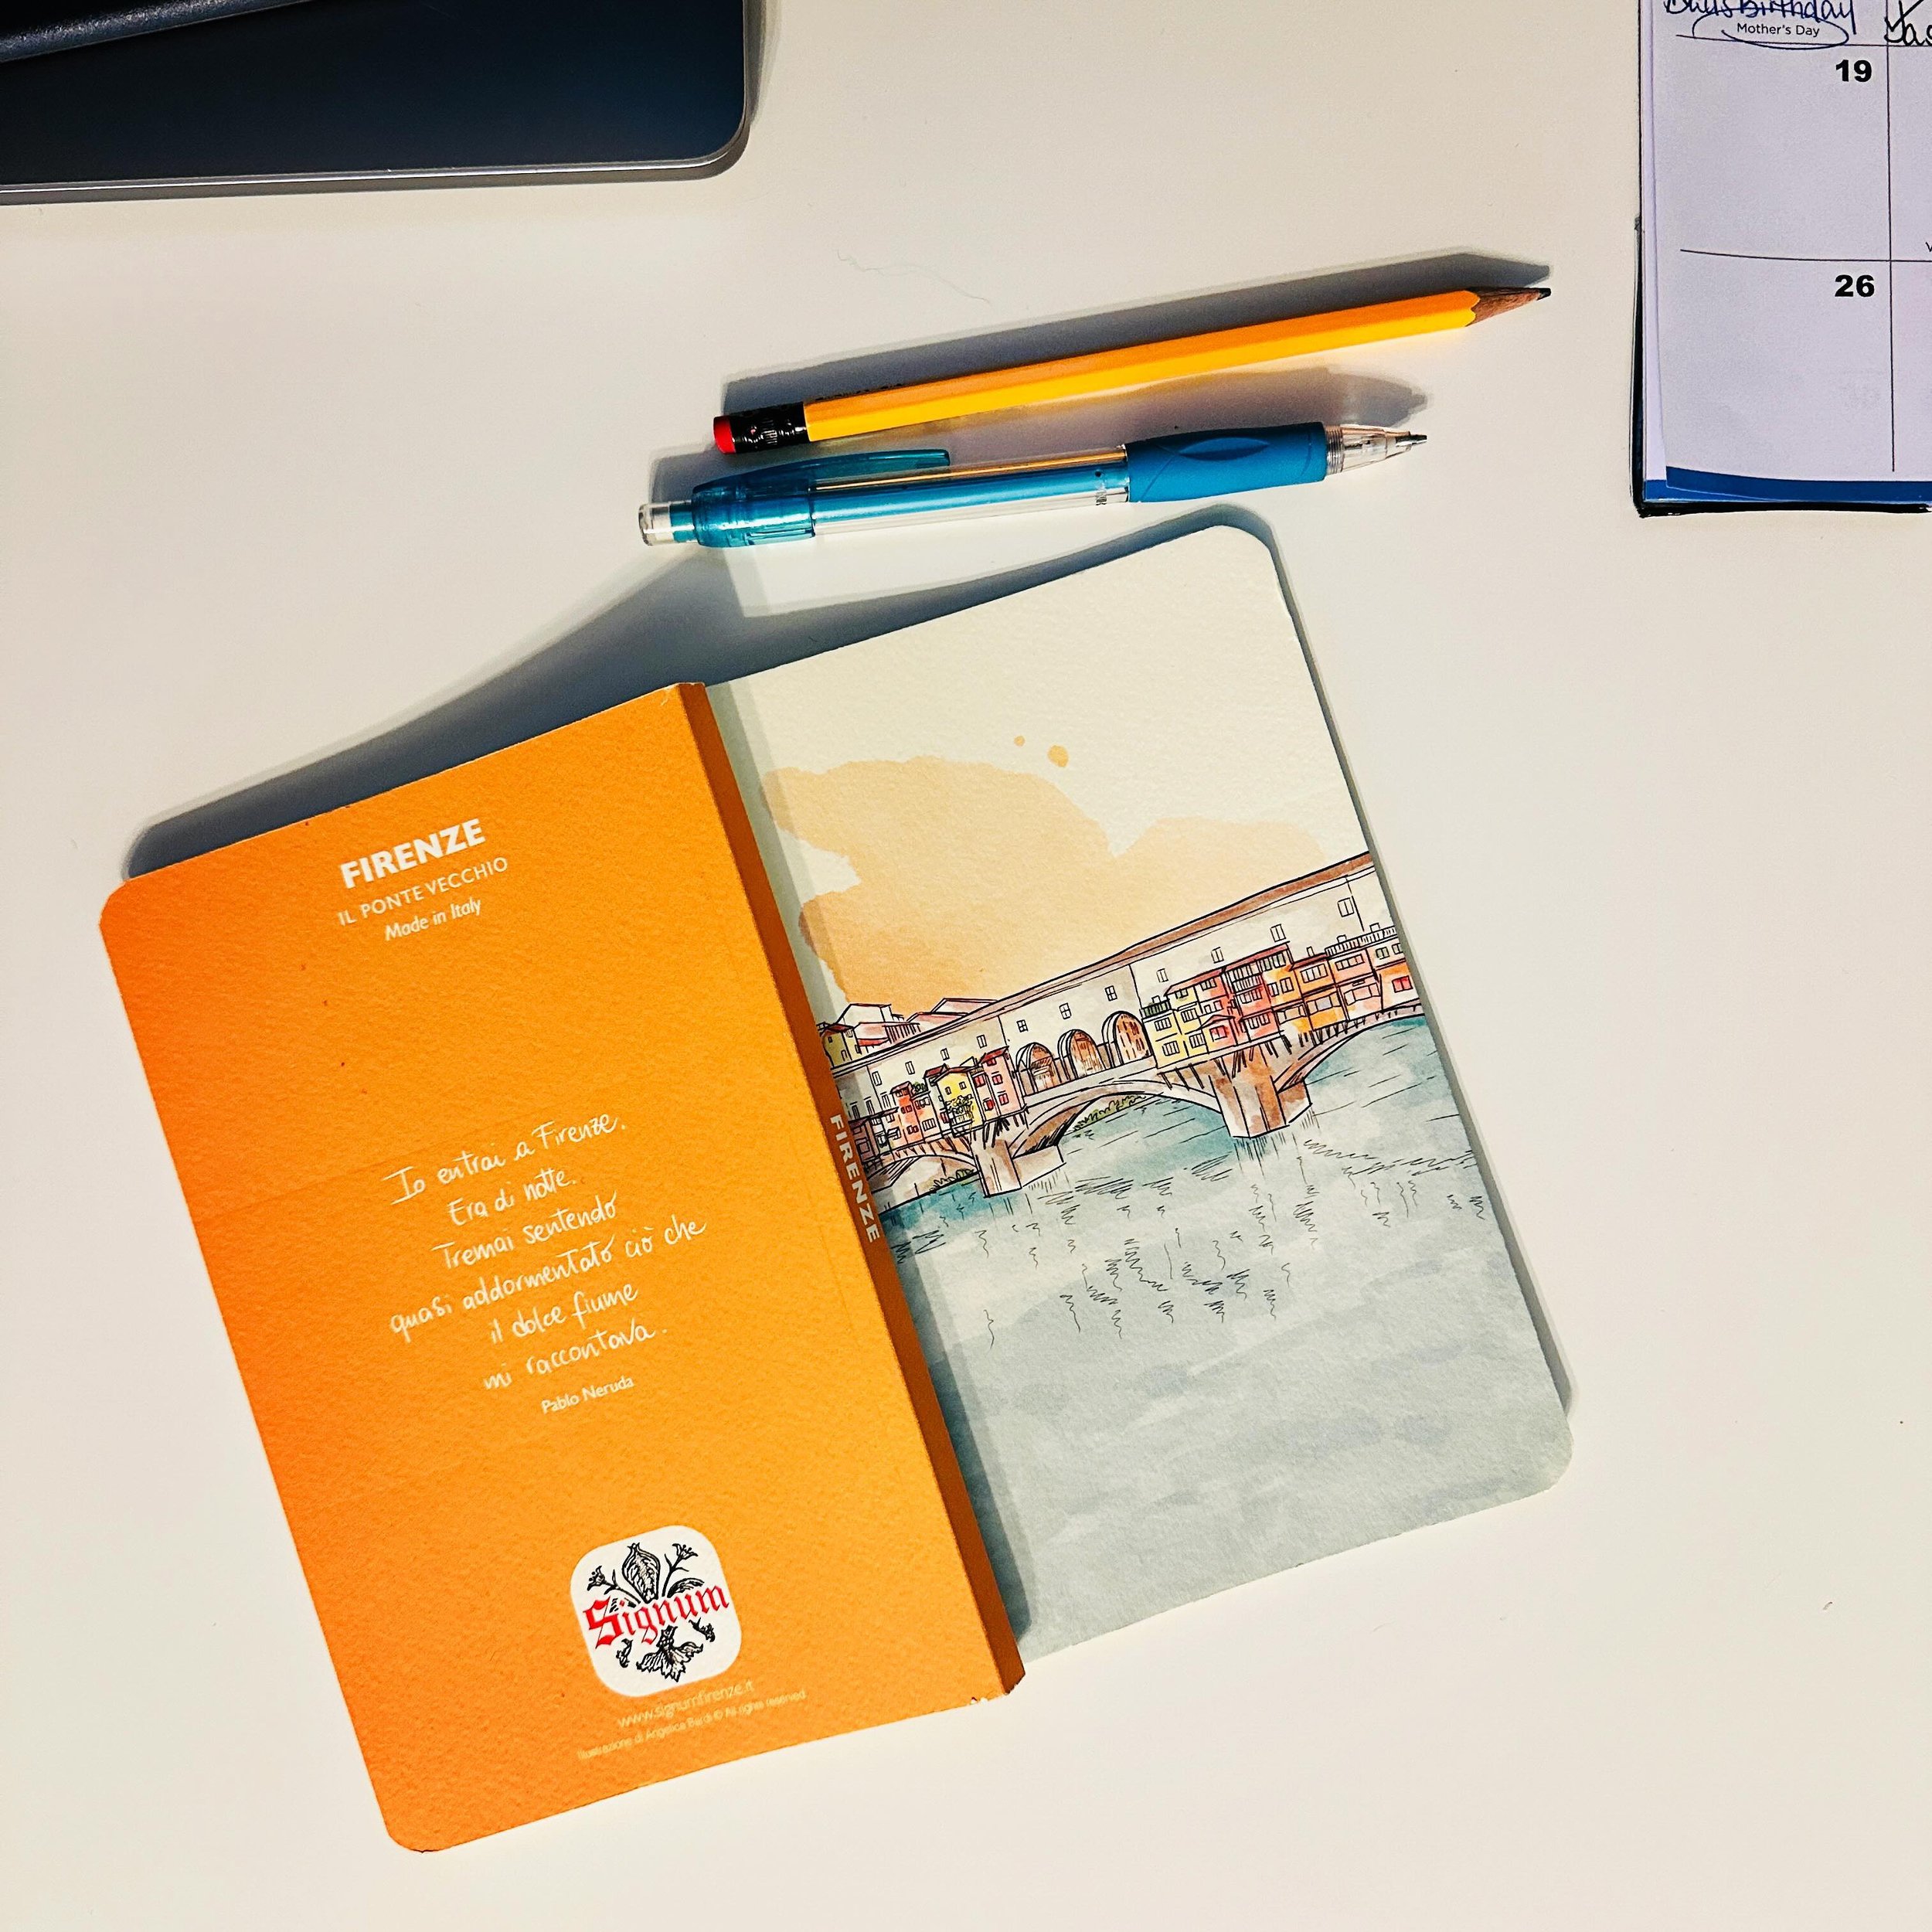 Putting pen to paper can be a powerful way to untangle your thoughts and manage stress. Putting this beautiful journal I picked up in Italy 🇮🇹 last month to work. 

I ran across a post about &ldquo;one line a day&rdquo; journaling and that seemed t